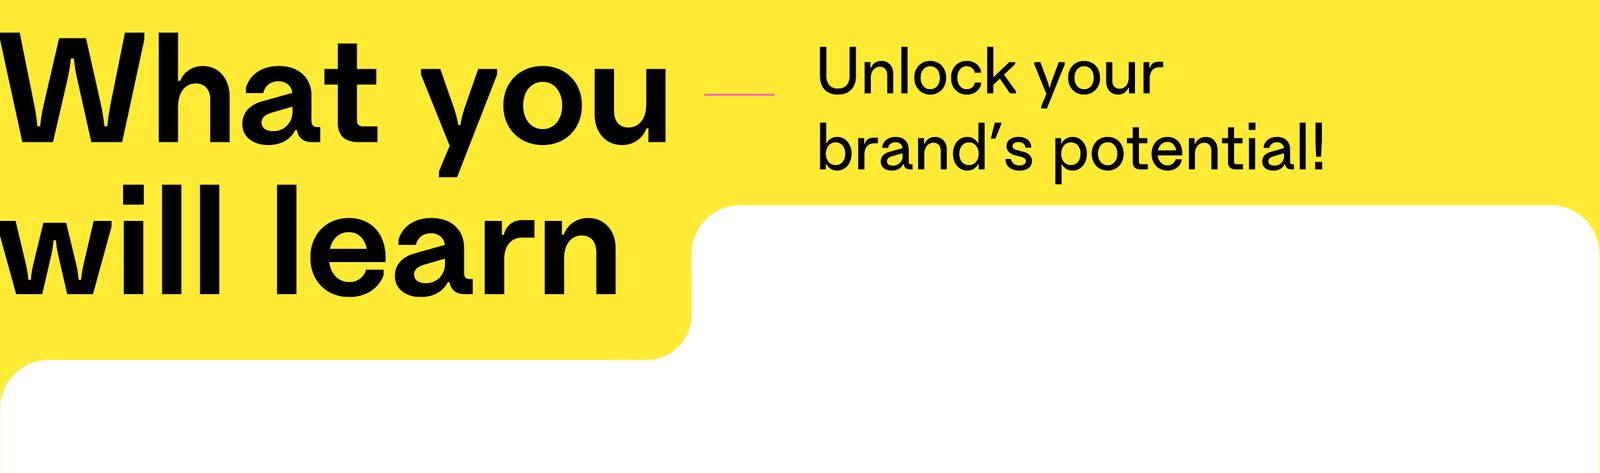 What you will learn - Unlock your brands potential!